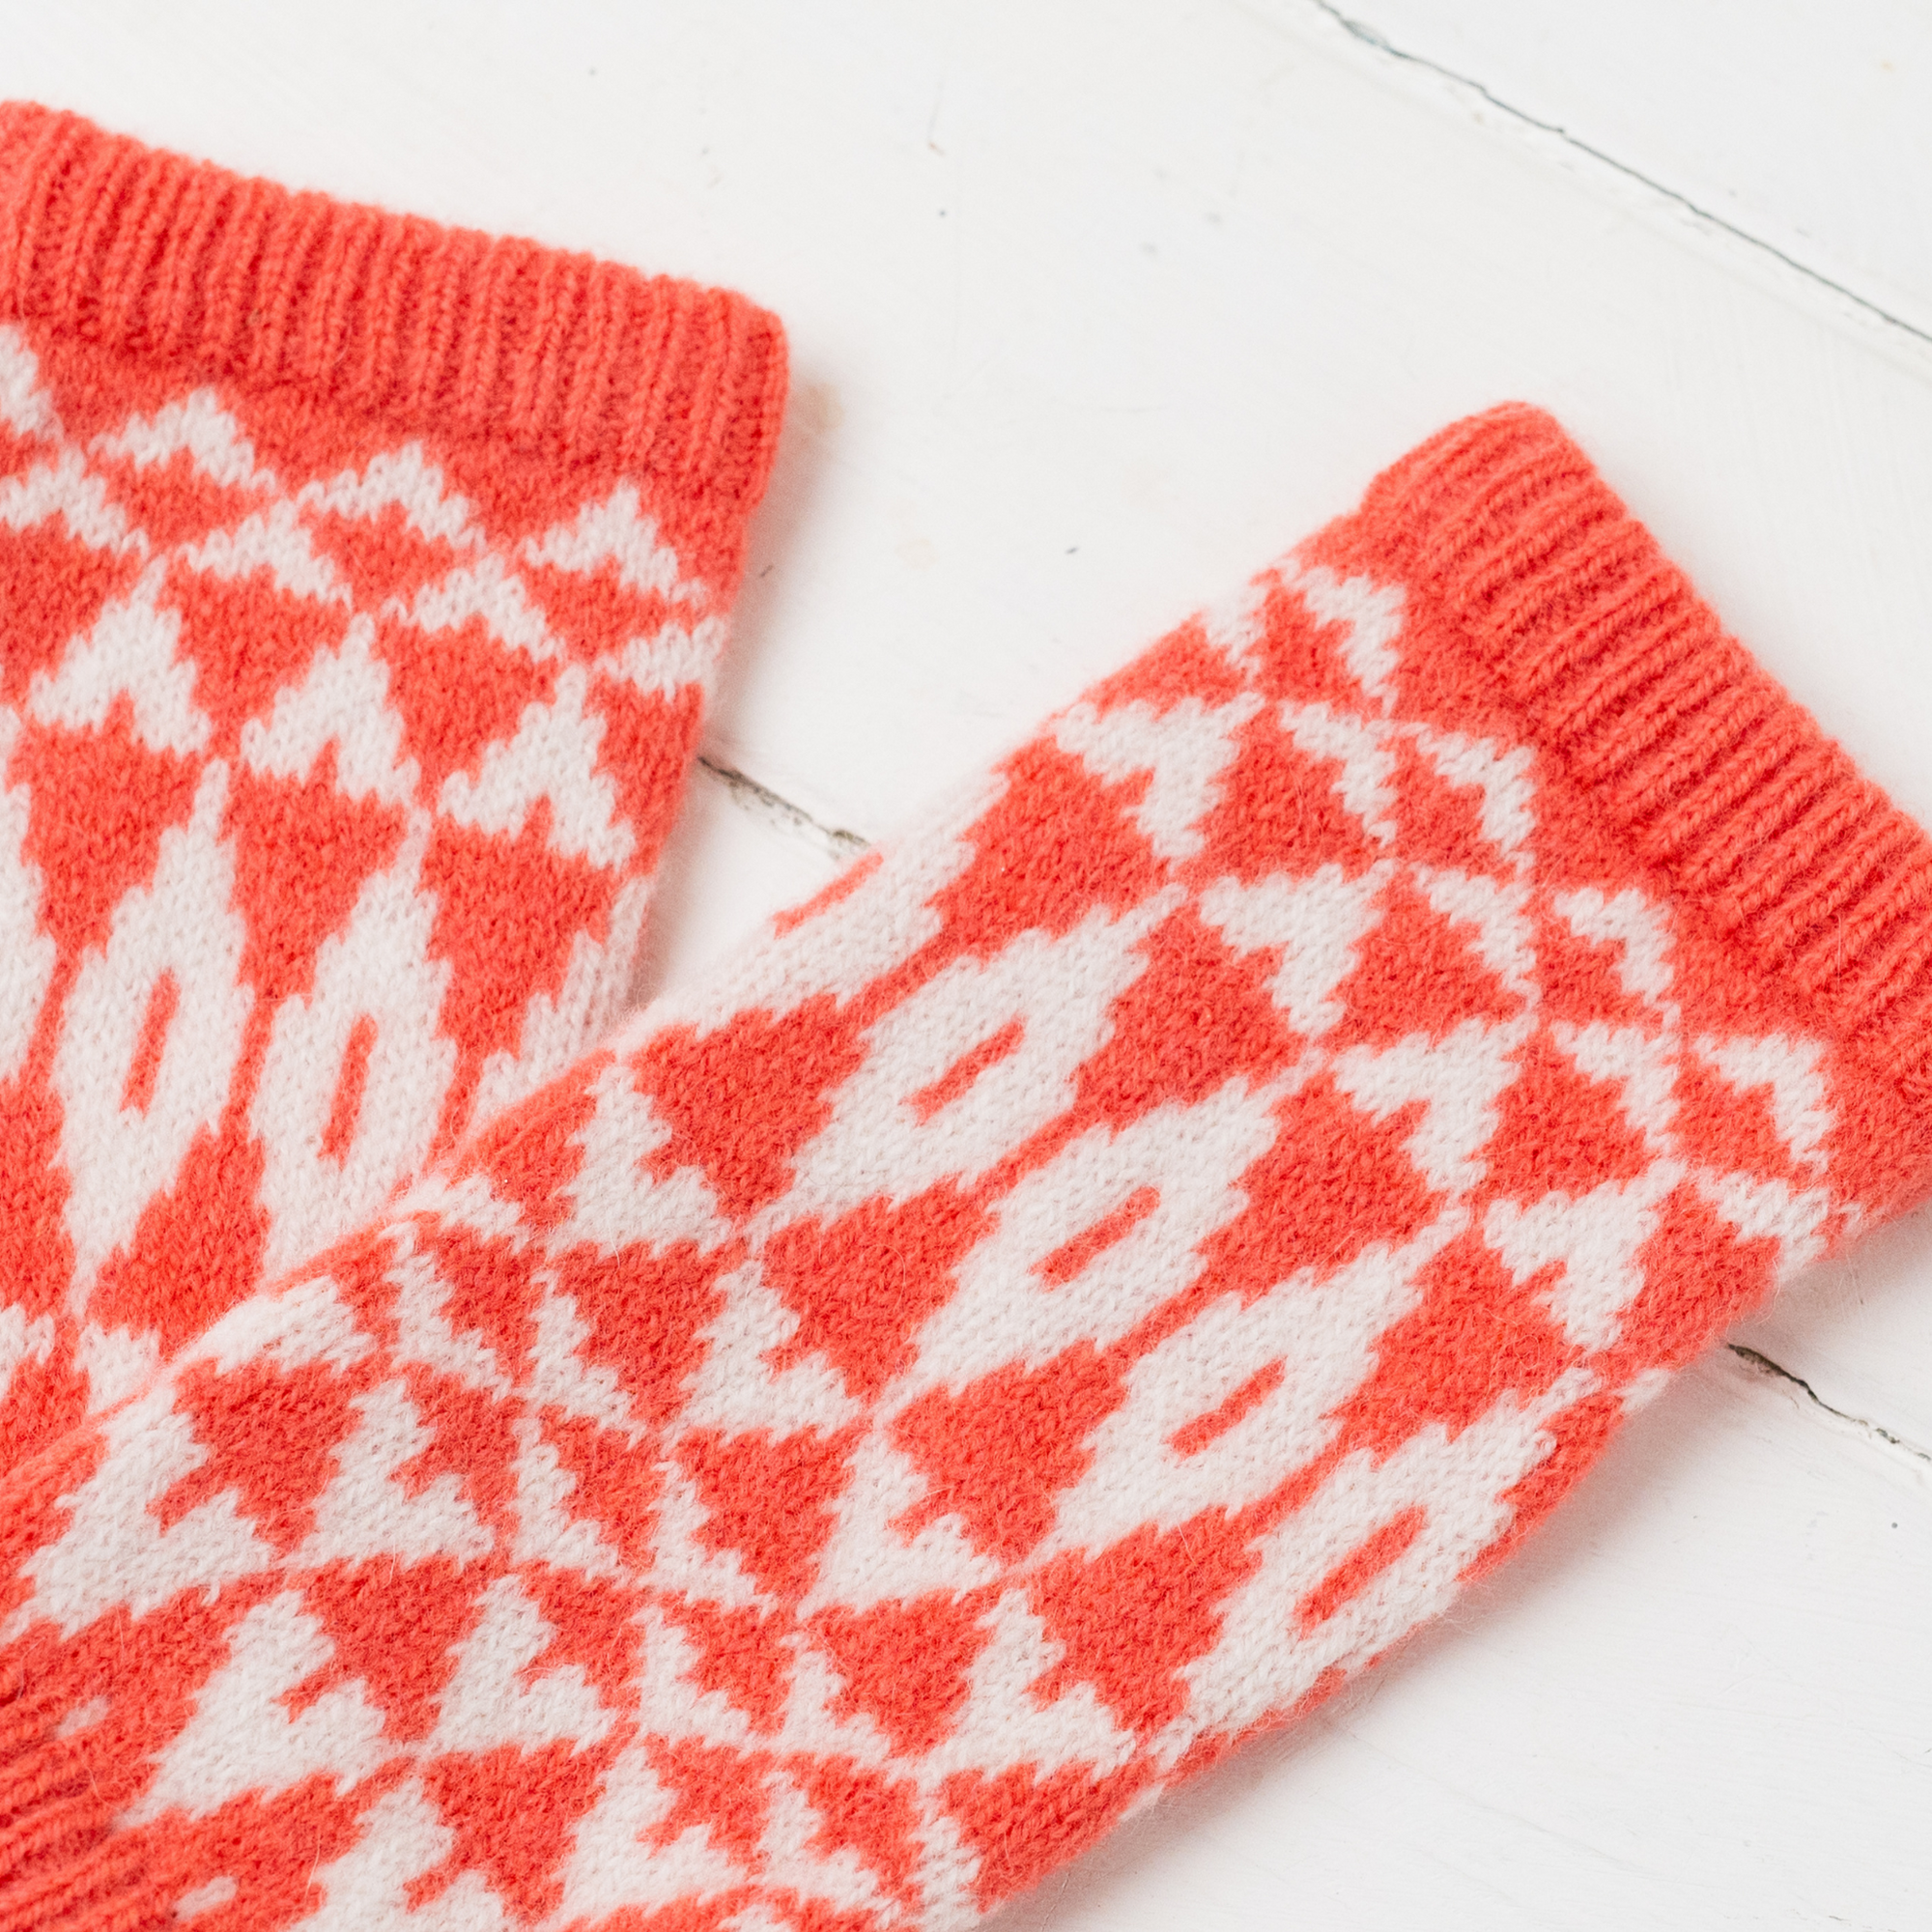 Mirror wrist warmers - coral and white